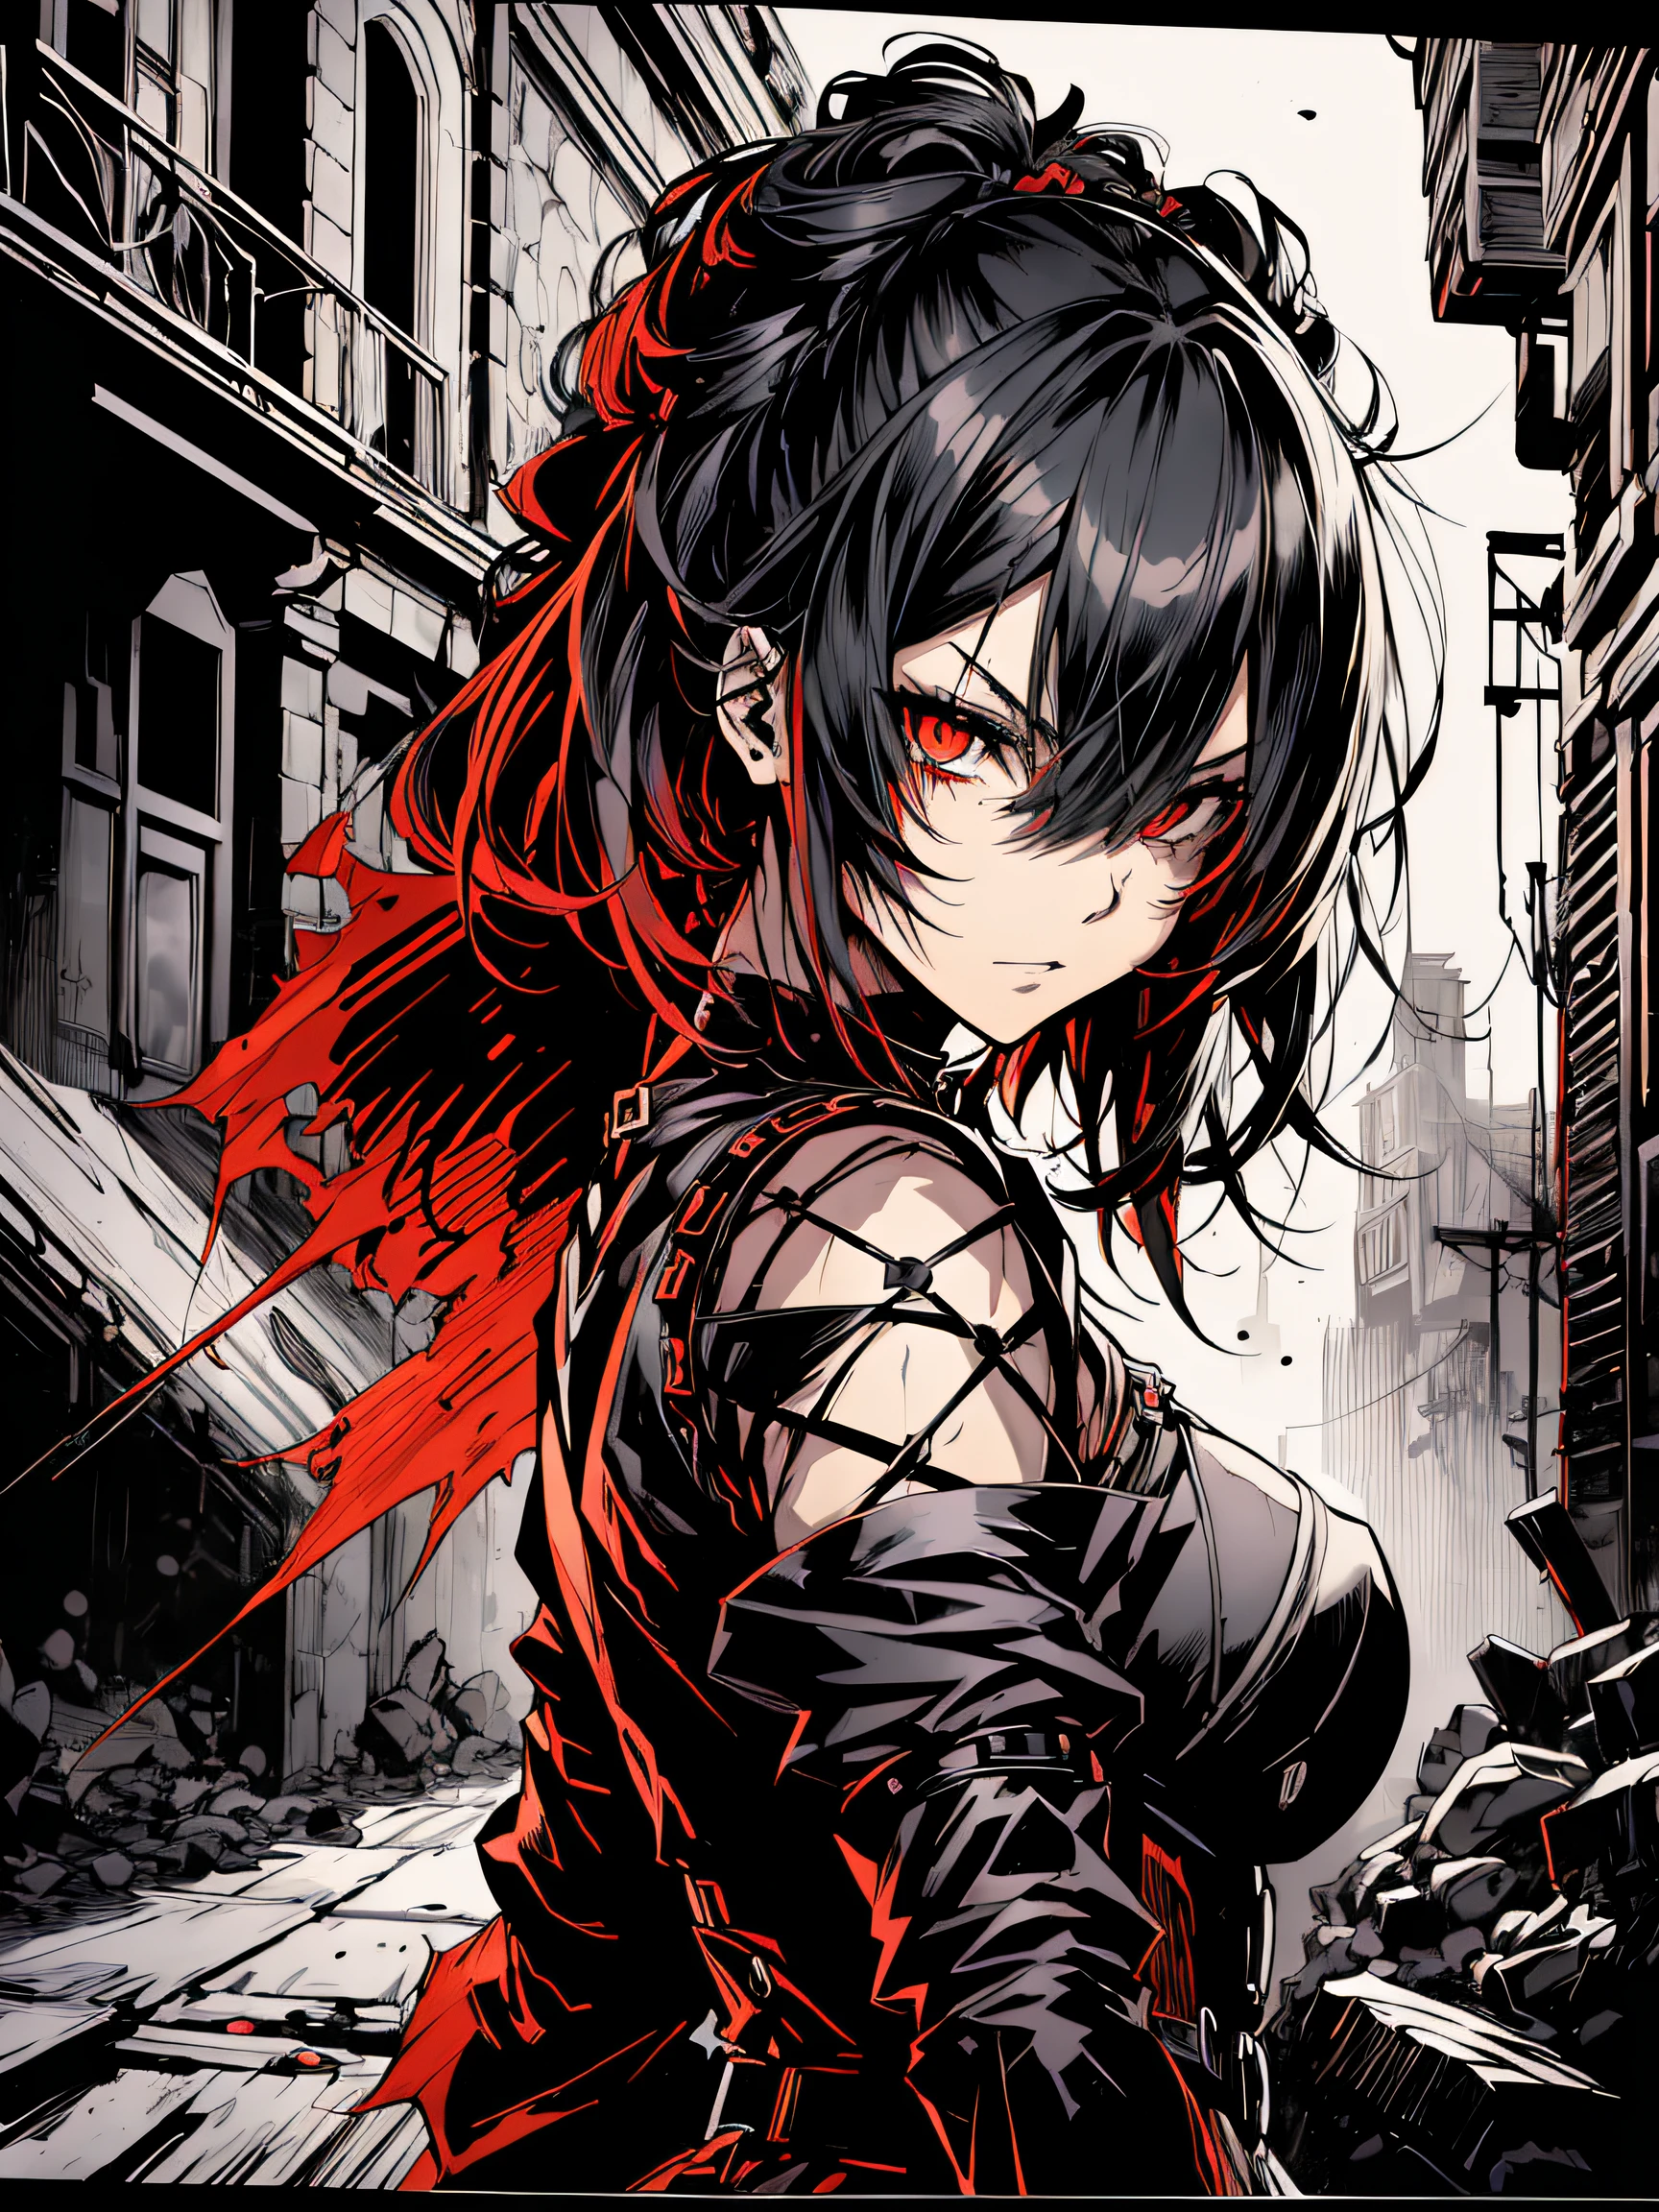 v5lcn style,(Best Quality,masutepiece:1.2),(Anime style,Comic Noir Style:1.1),dynamic compositions,1girl in,cute-style,Adorable,extremely detailed eye,extra detailed face,very detail hair,8K,resolution,gothic dress,Gothic punk,blood splashing、dark hue、Red hue